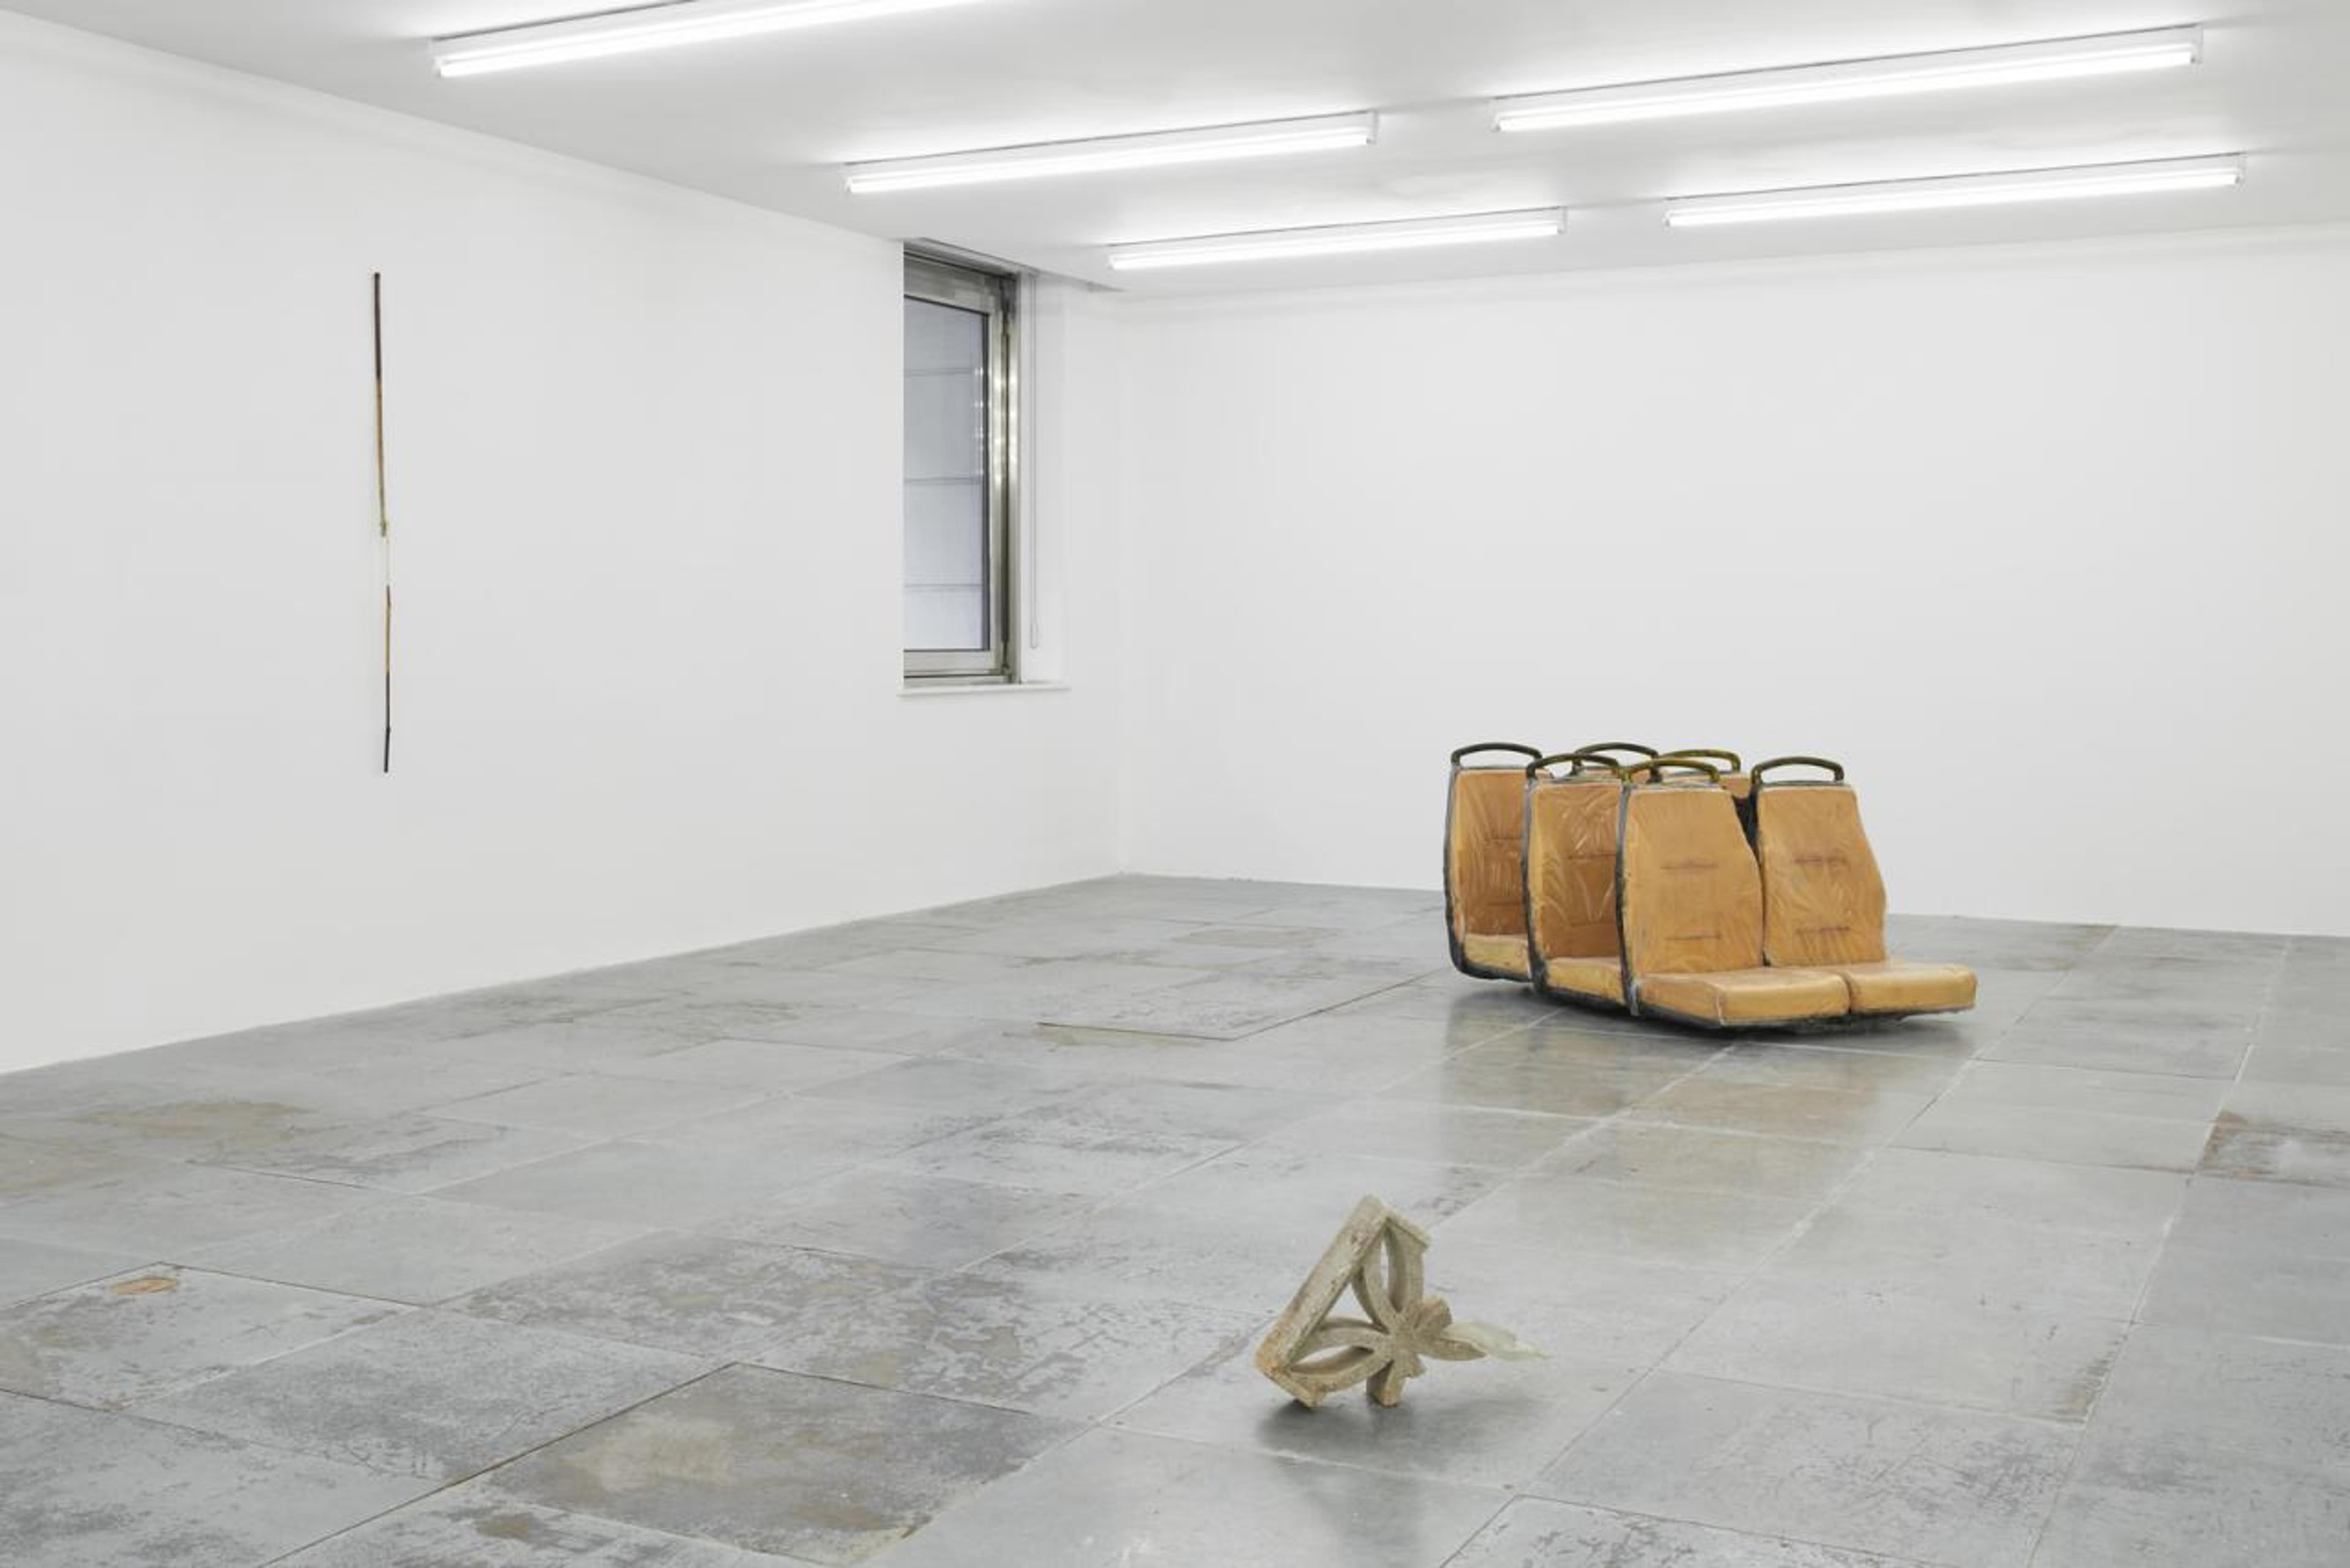 Rhea Dilon, Nonbody Nonthing No Thing , 2021. Installation view, V.O Curations, 2021, London. Courtesy: the artist and V.O Curations. Photo: Theo Christelis